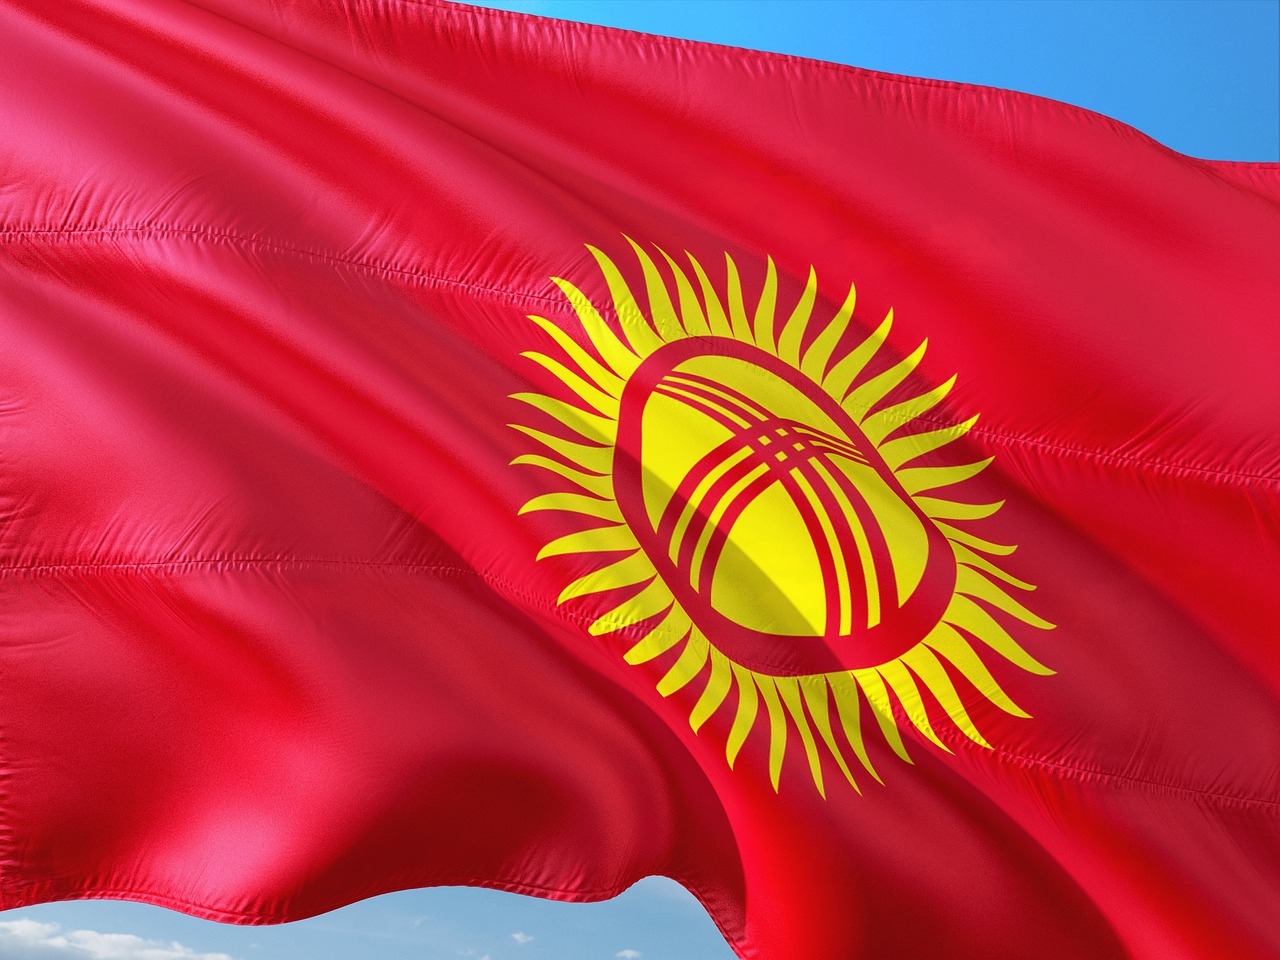 UN expresses concern over detained journalists in Kyrgyzstan